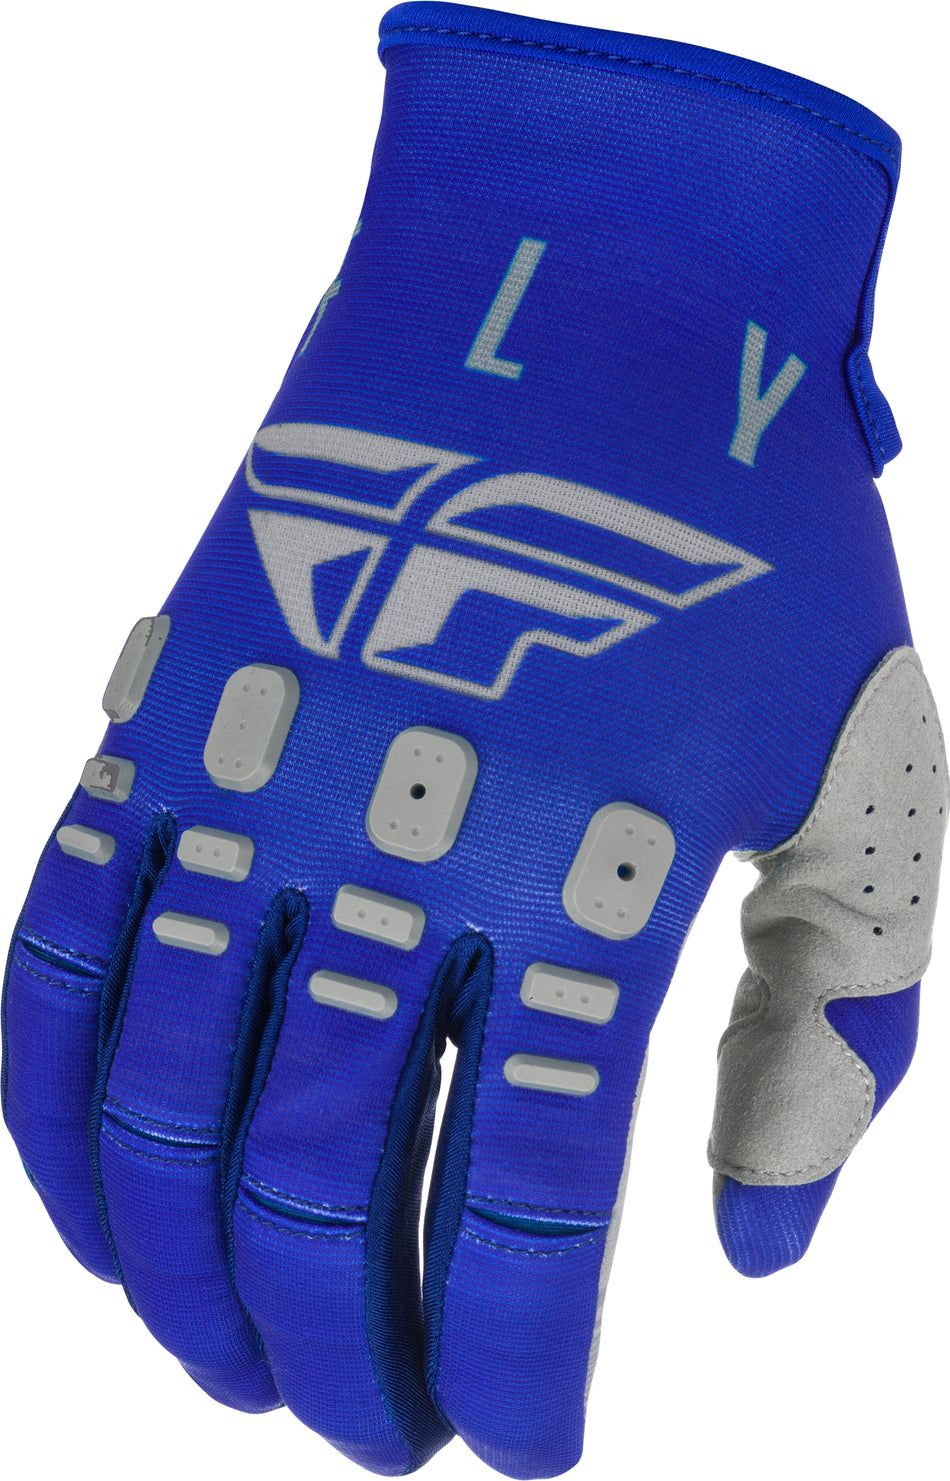 FLY RACING Youth Kinetic K121 Gloves Blue/Navy/Grey Sz 04 374-41104